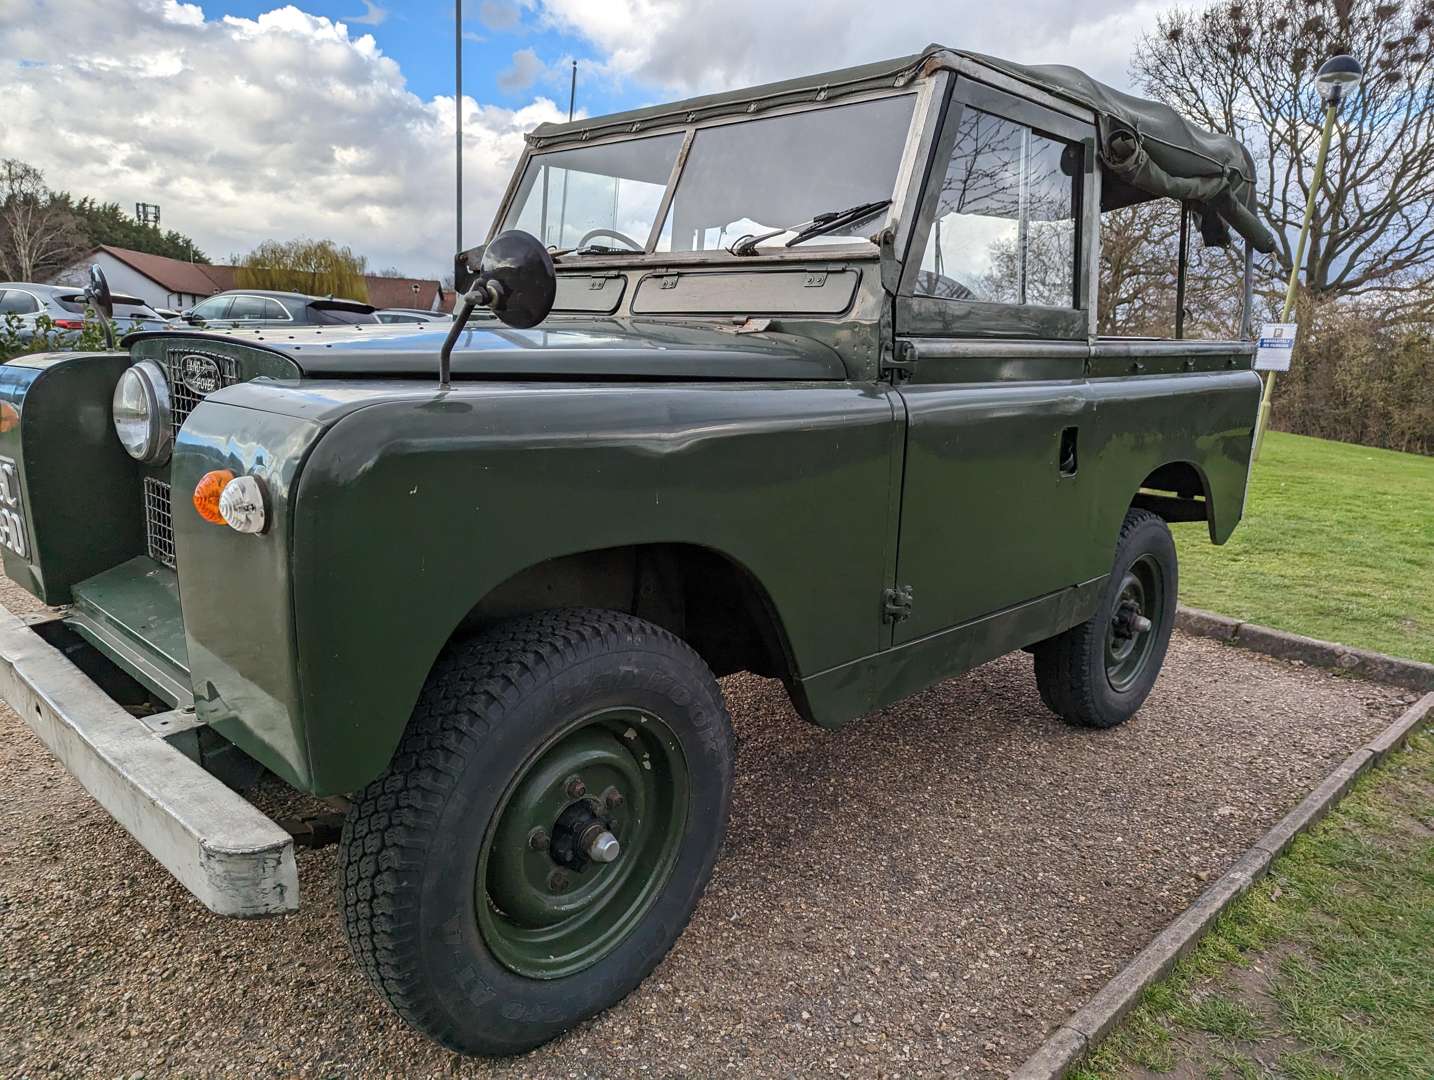 1958 LAND ROVER SWB SERIES II - Image 11 of 26